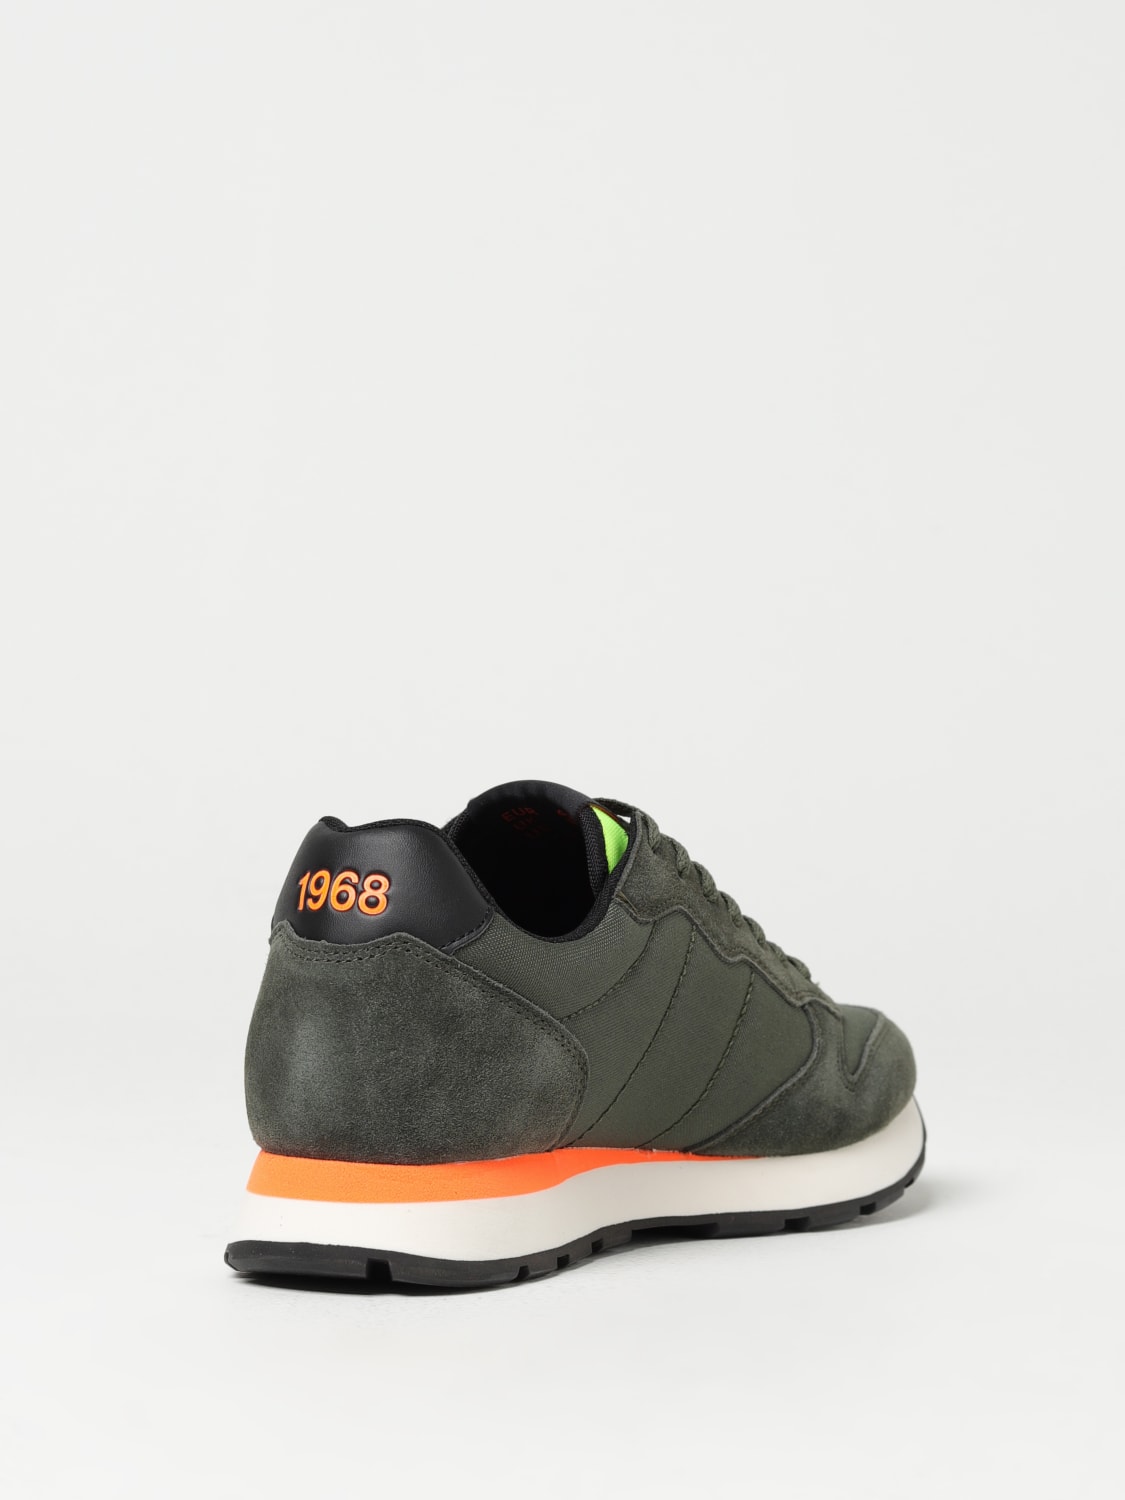 SUN 68: sneakers for man - Military | Sun 68 sneakers Z43102 online at ...